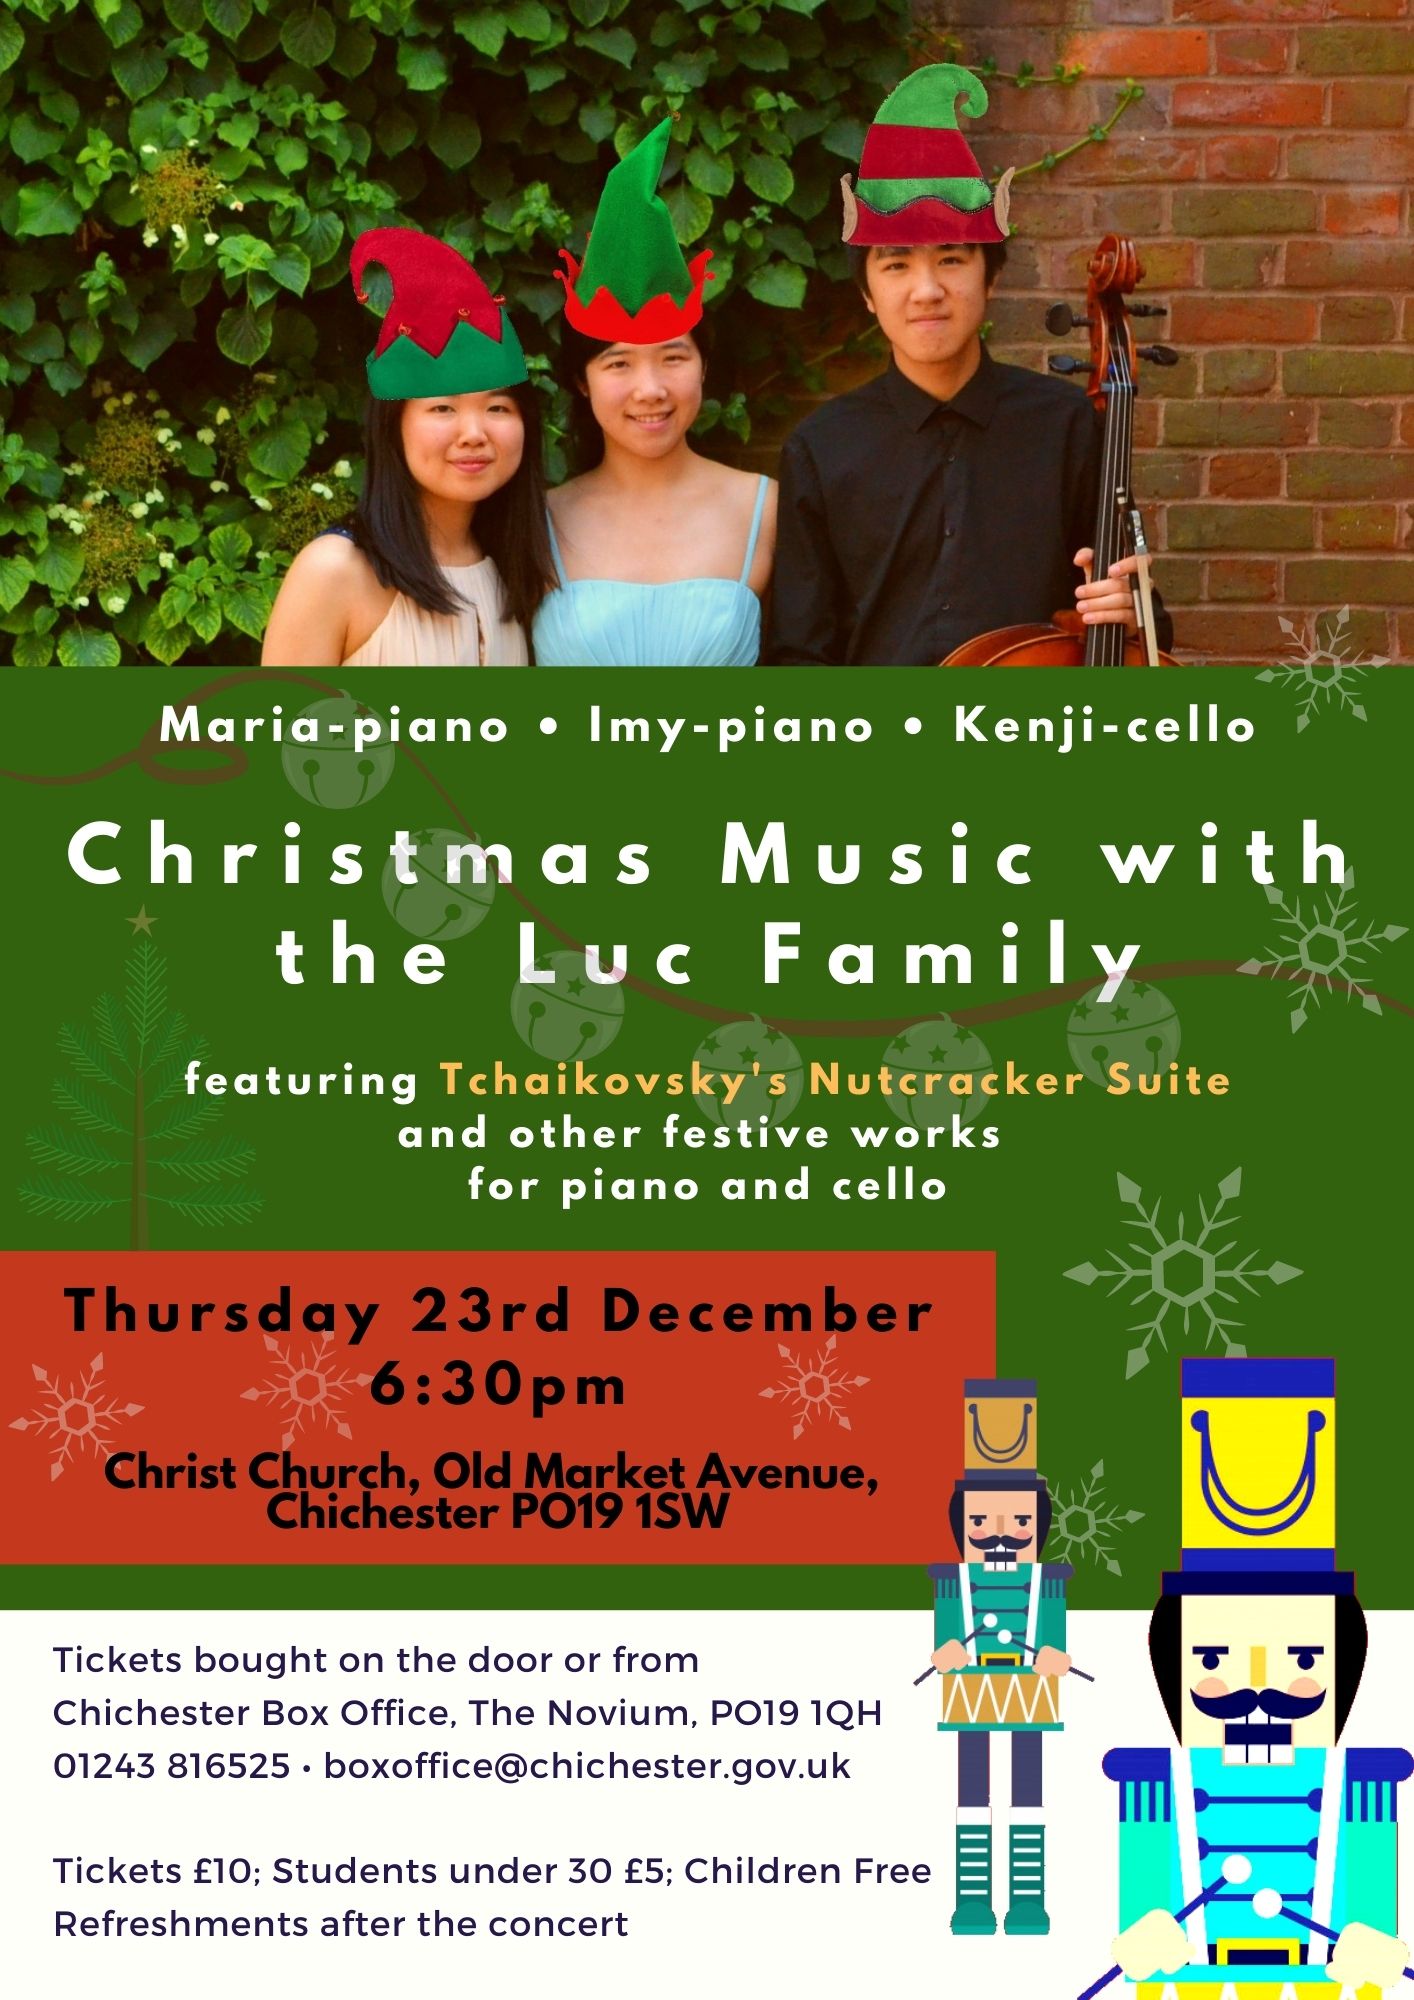 Christmas concert with the Luc Family